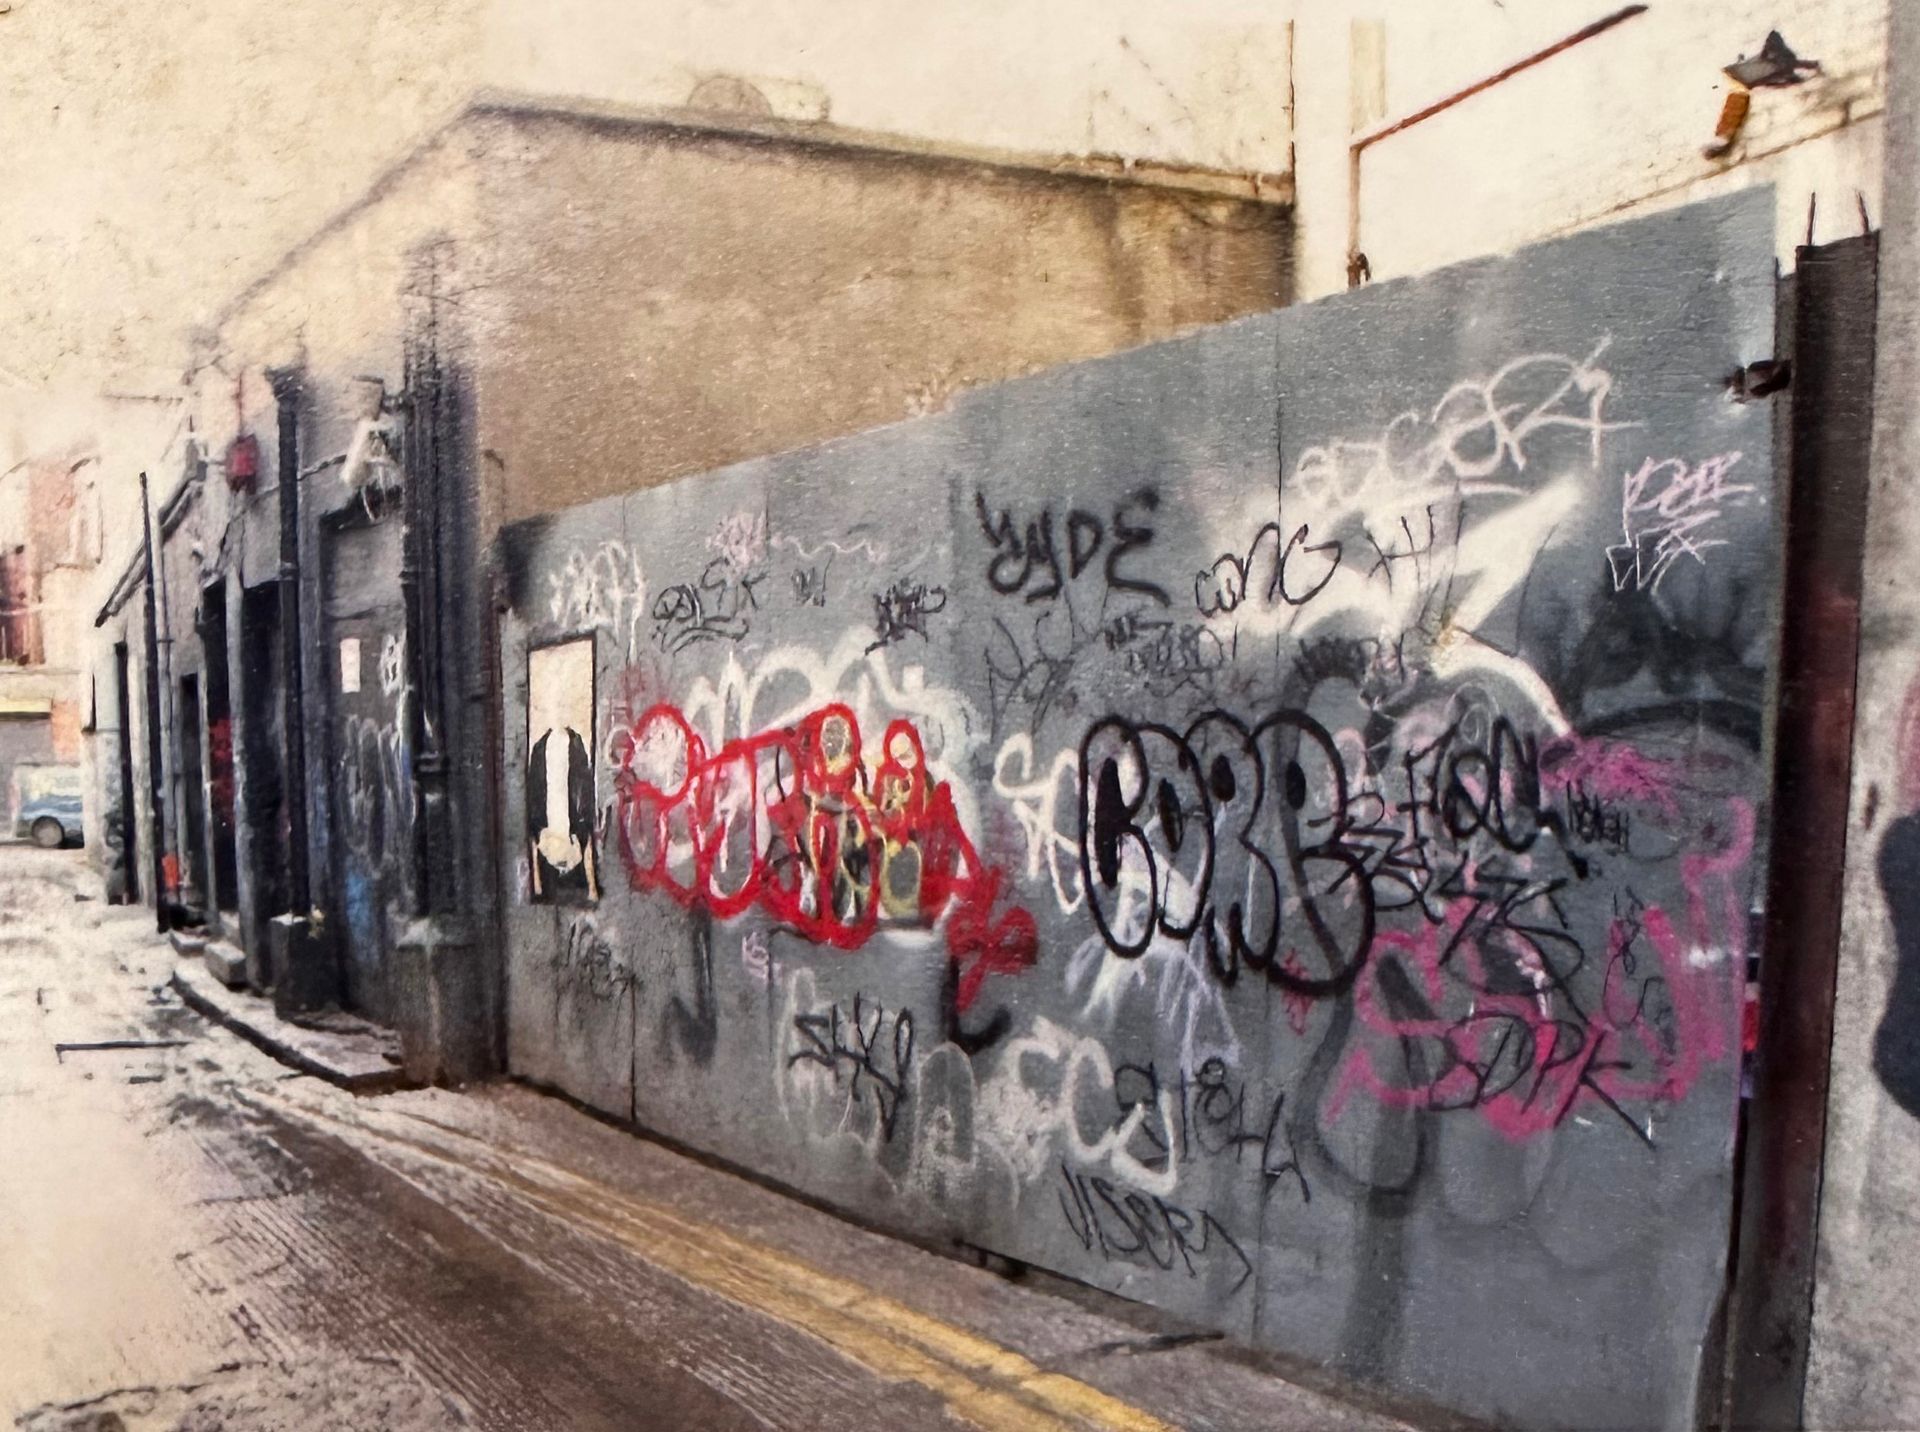 Grubby, derelict laneway in Dublin. Boarded up buildings covered in graffiti and dirt.